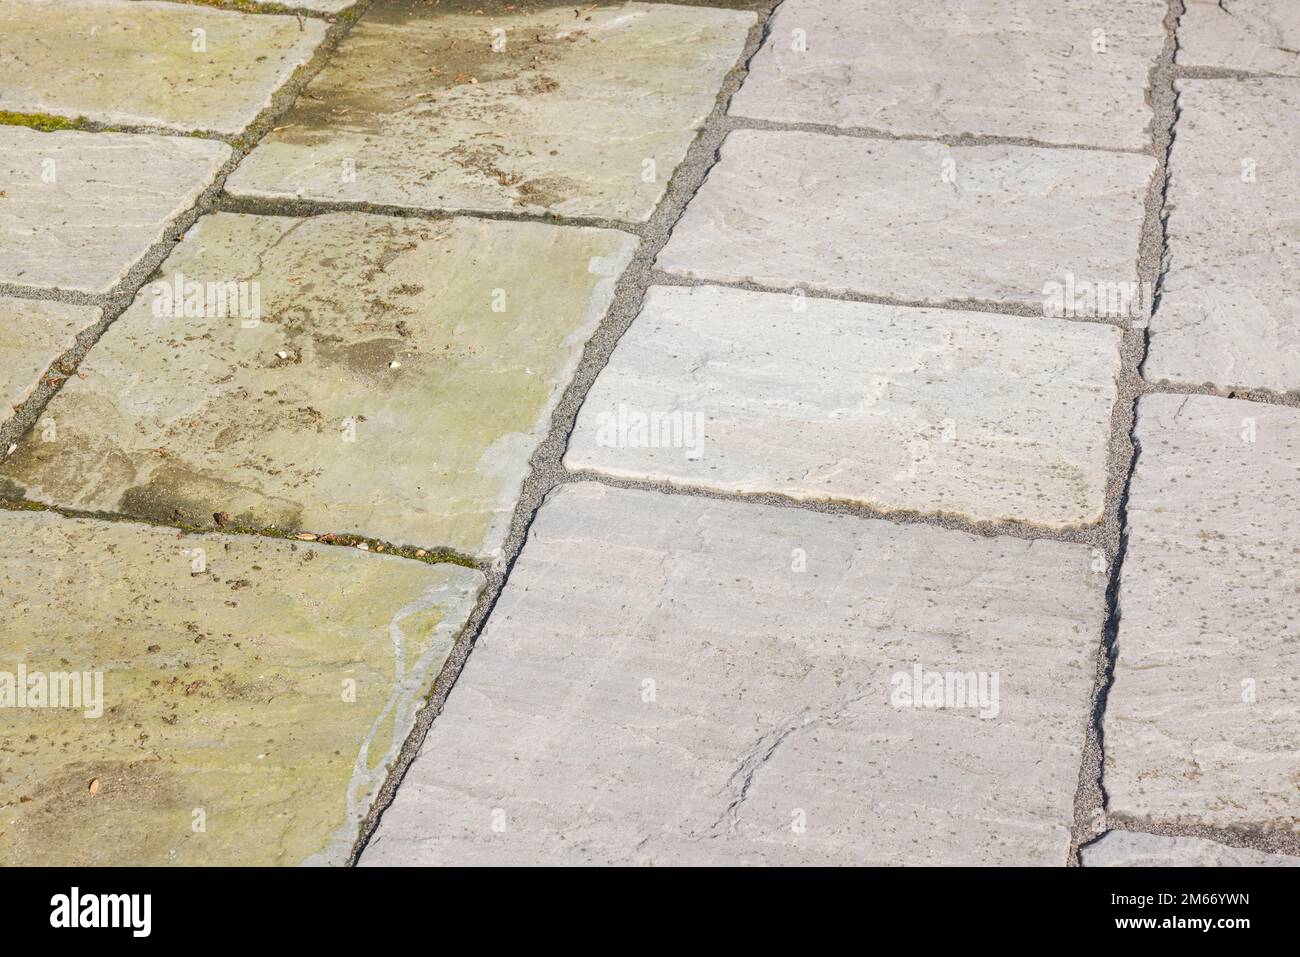 Cleaning sandstone paving. Garden patio before and after jet washing or pressure washing, UK. Stock Photo